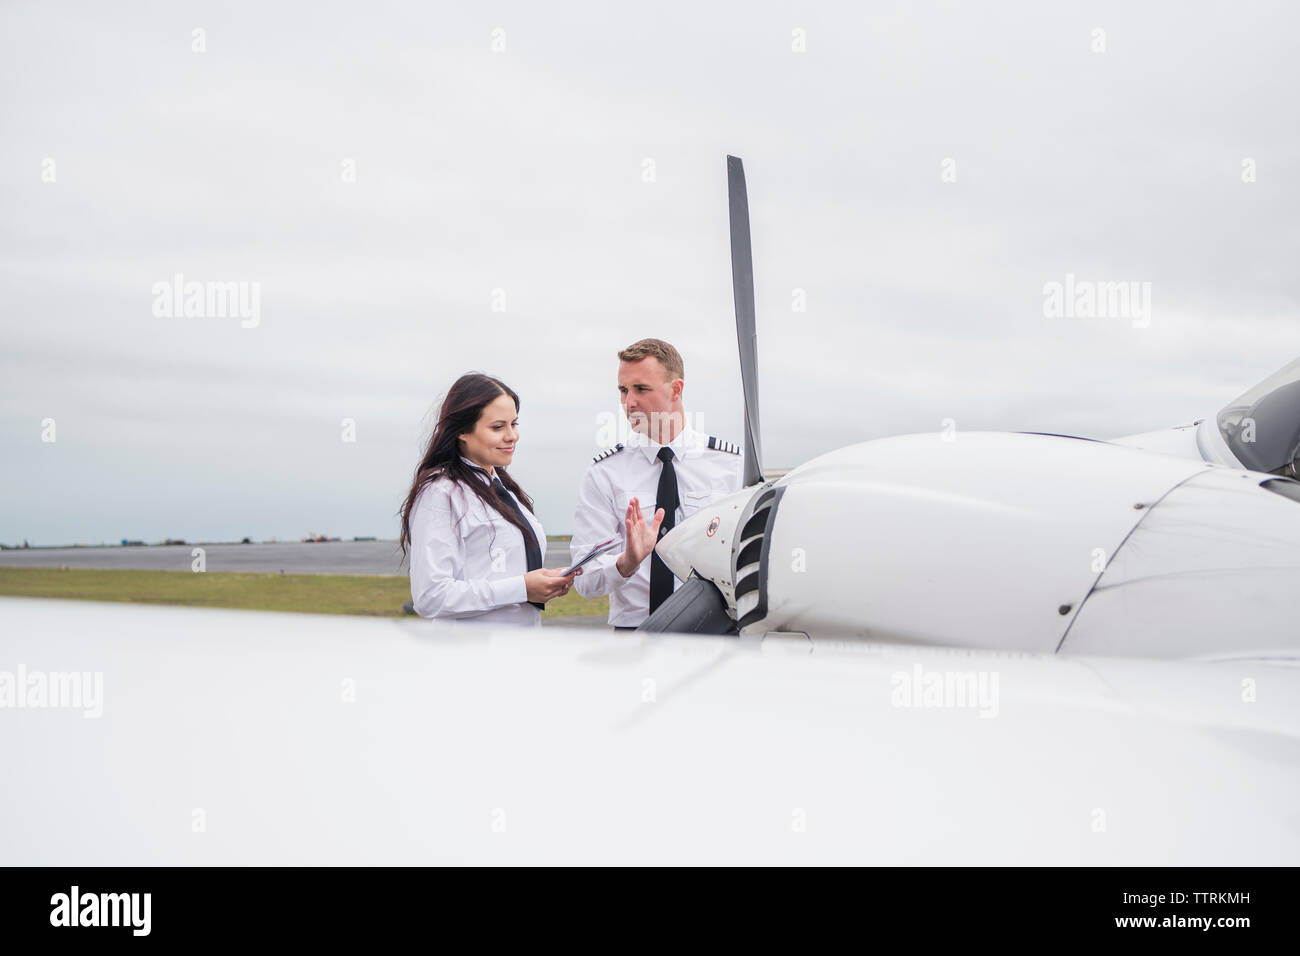 Engineer showing airplane parts to female trainee while standing against cloudy sky on airport runway Stock Photo